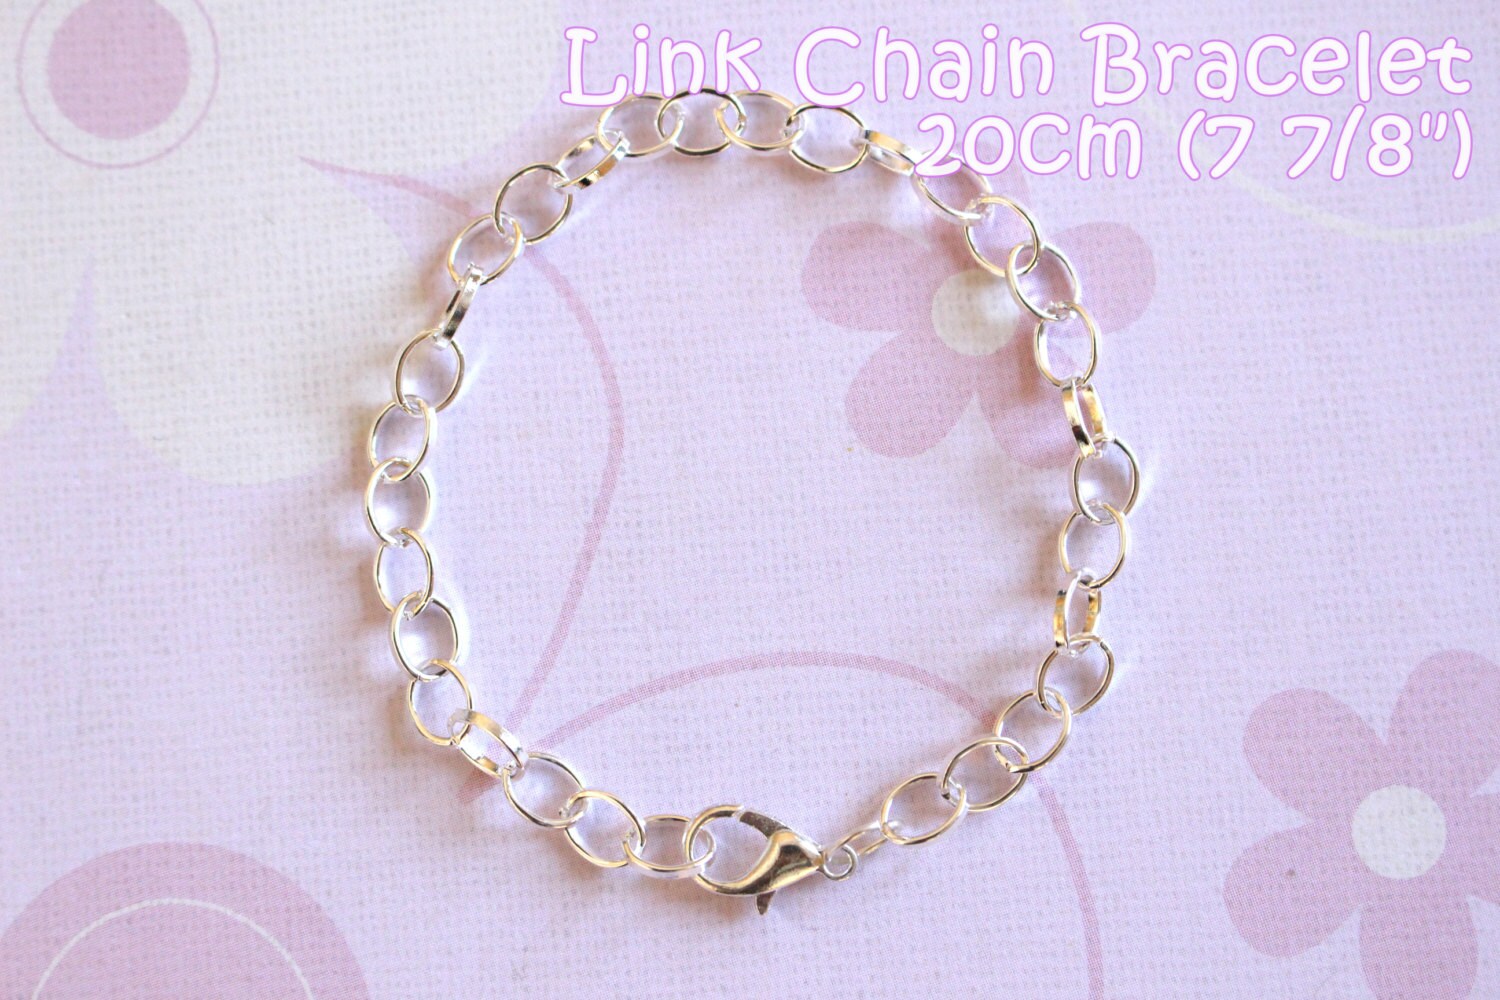 20cm 7 7/8 inches - 6pcs Silver Plated Lobster Clasp Link Chain Bracelets 